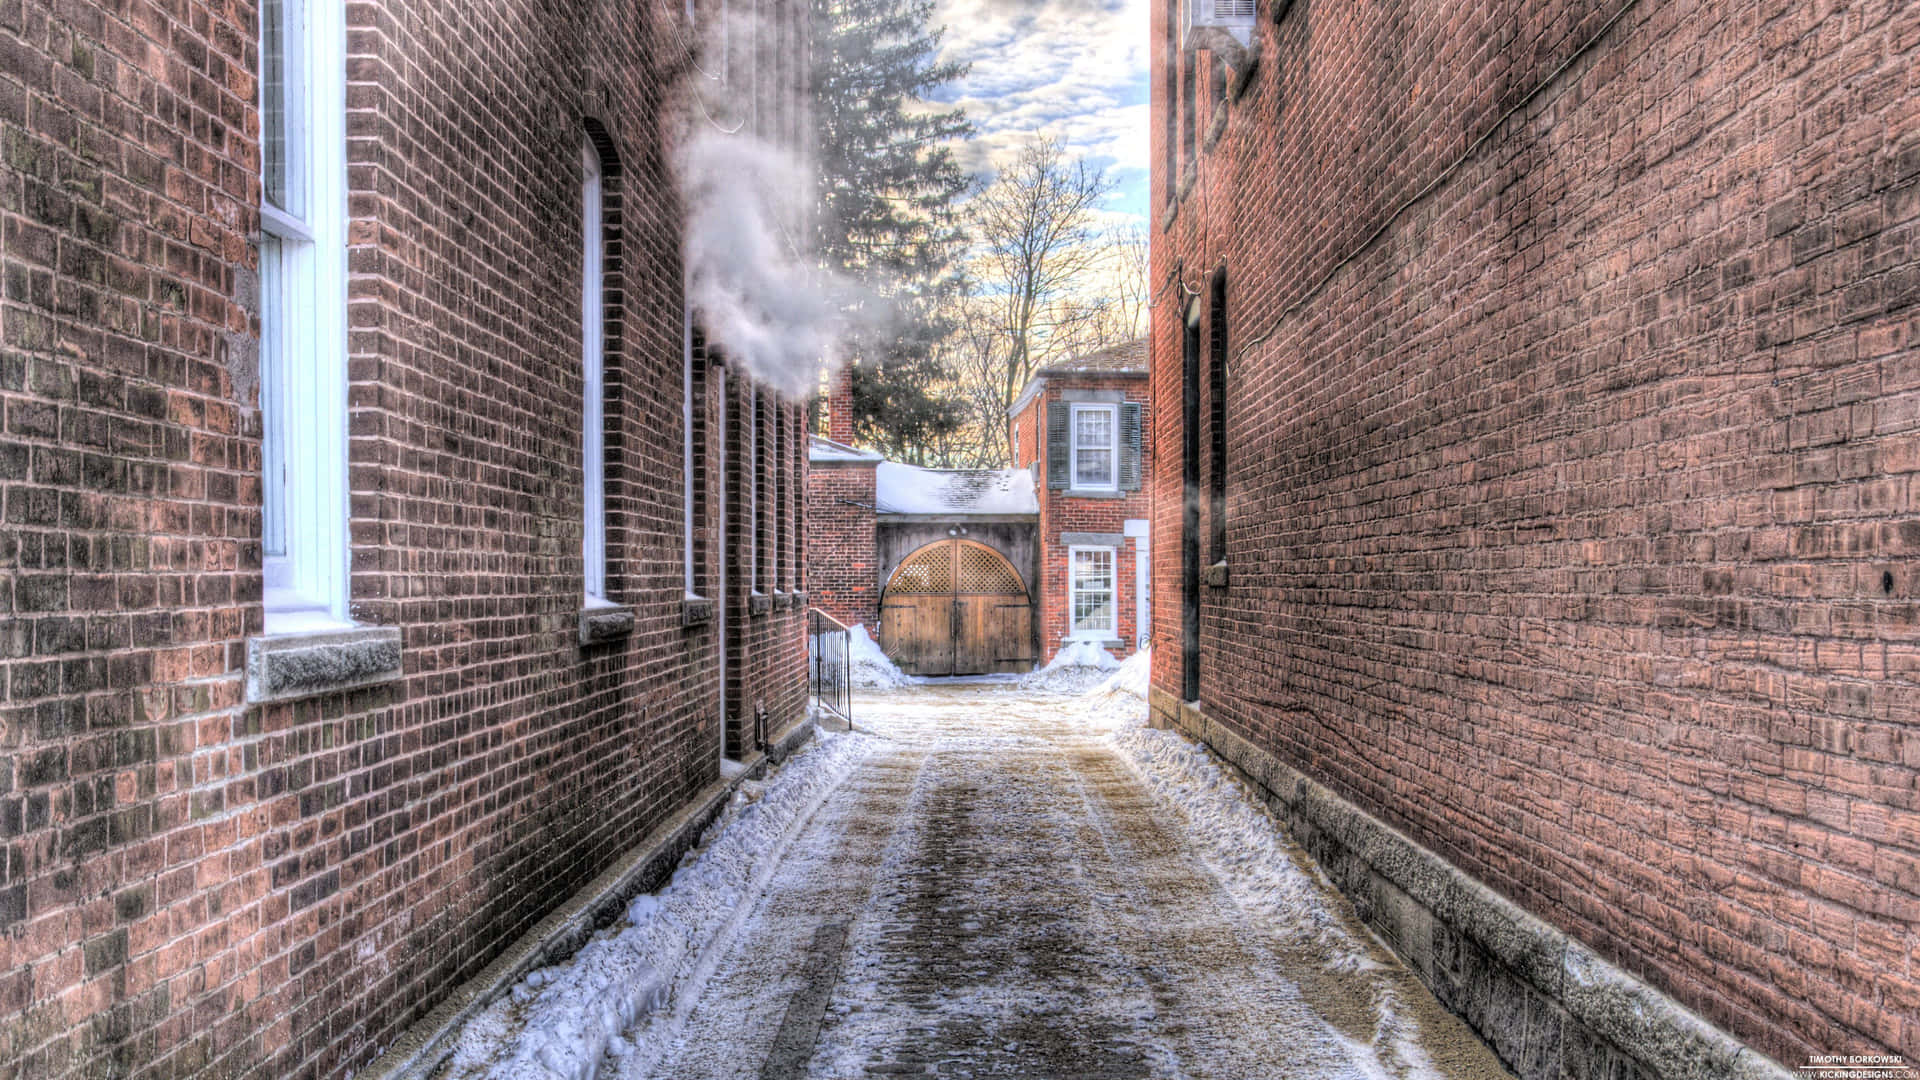 A Narrow Alleyway With Snow On The Ground